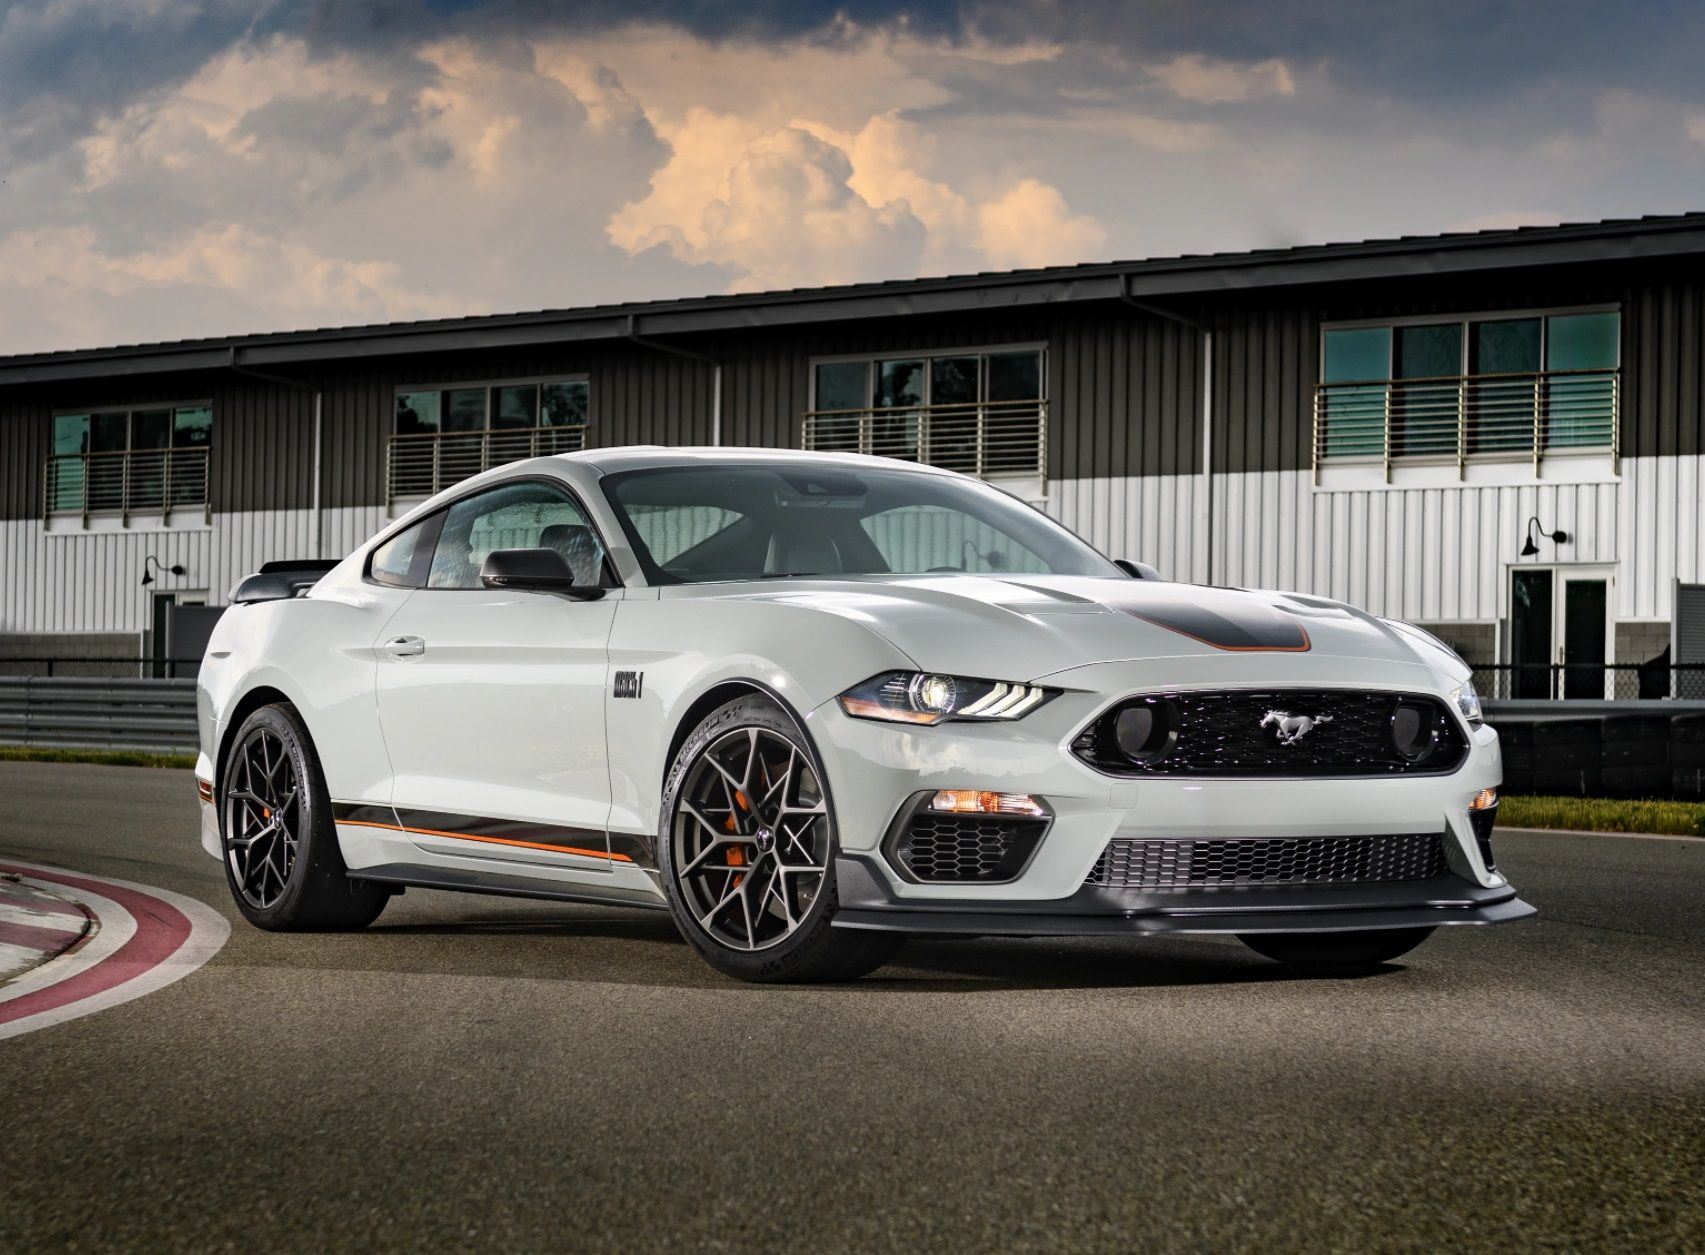 The 2021 Ford Mustang.